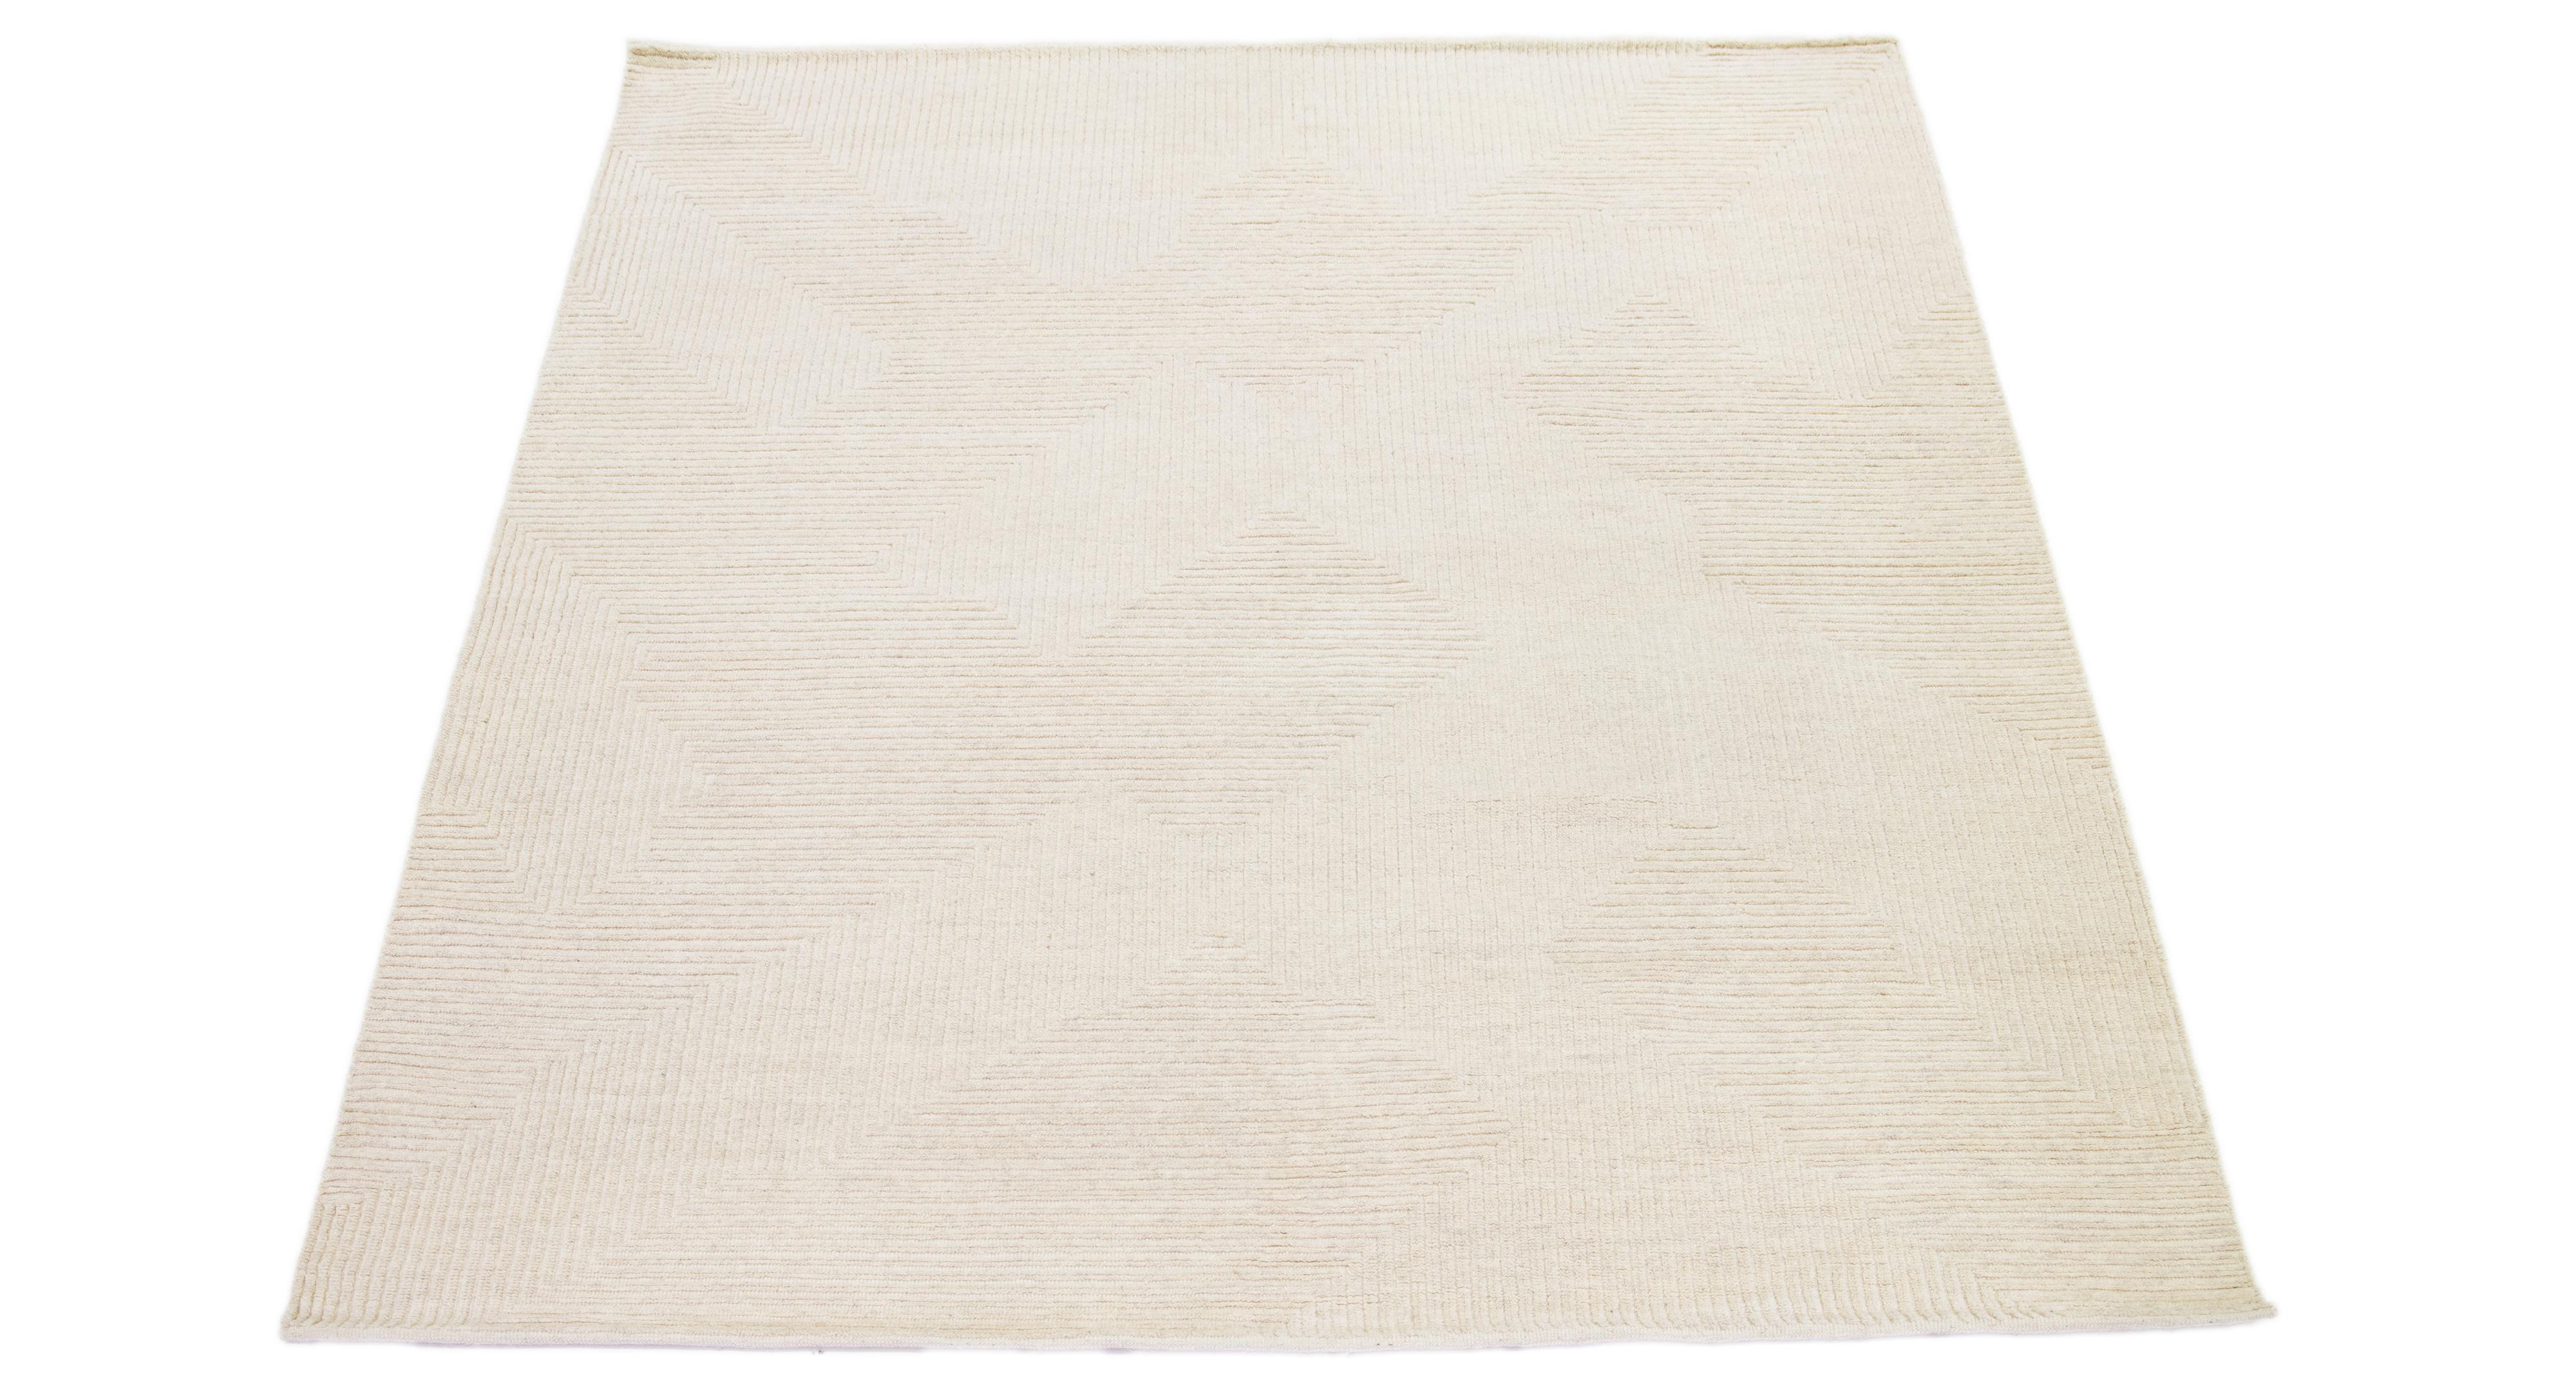 This hand-knotted wool rug showcases a modern Moroccan-inspired motif highlighting understated texture against a bold beige foundation, creating a captivating geometric Design.

This rug measures 8'2